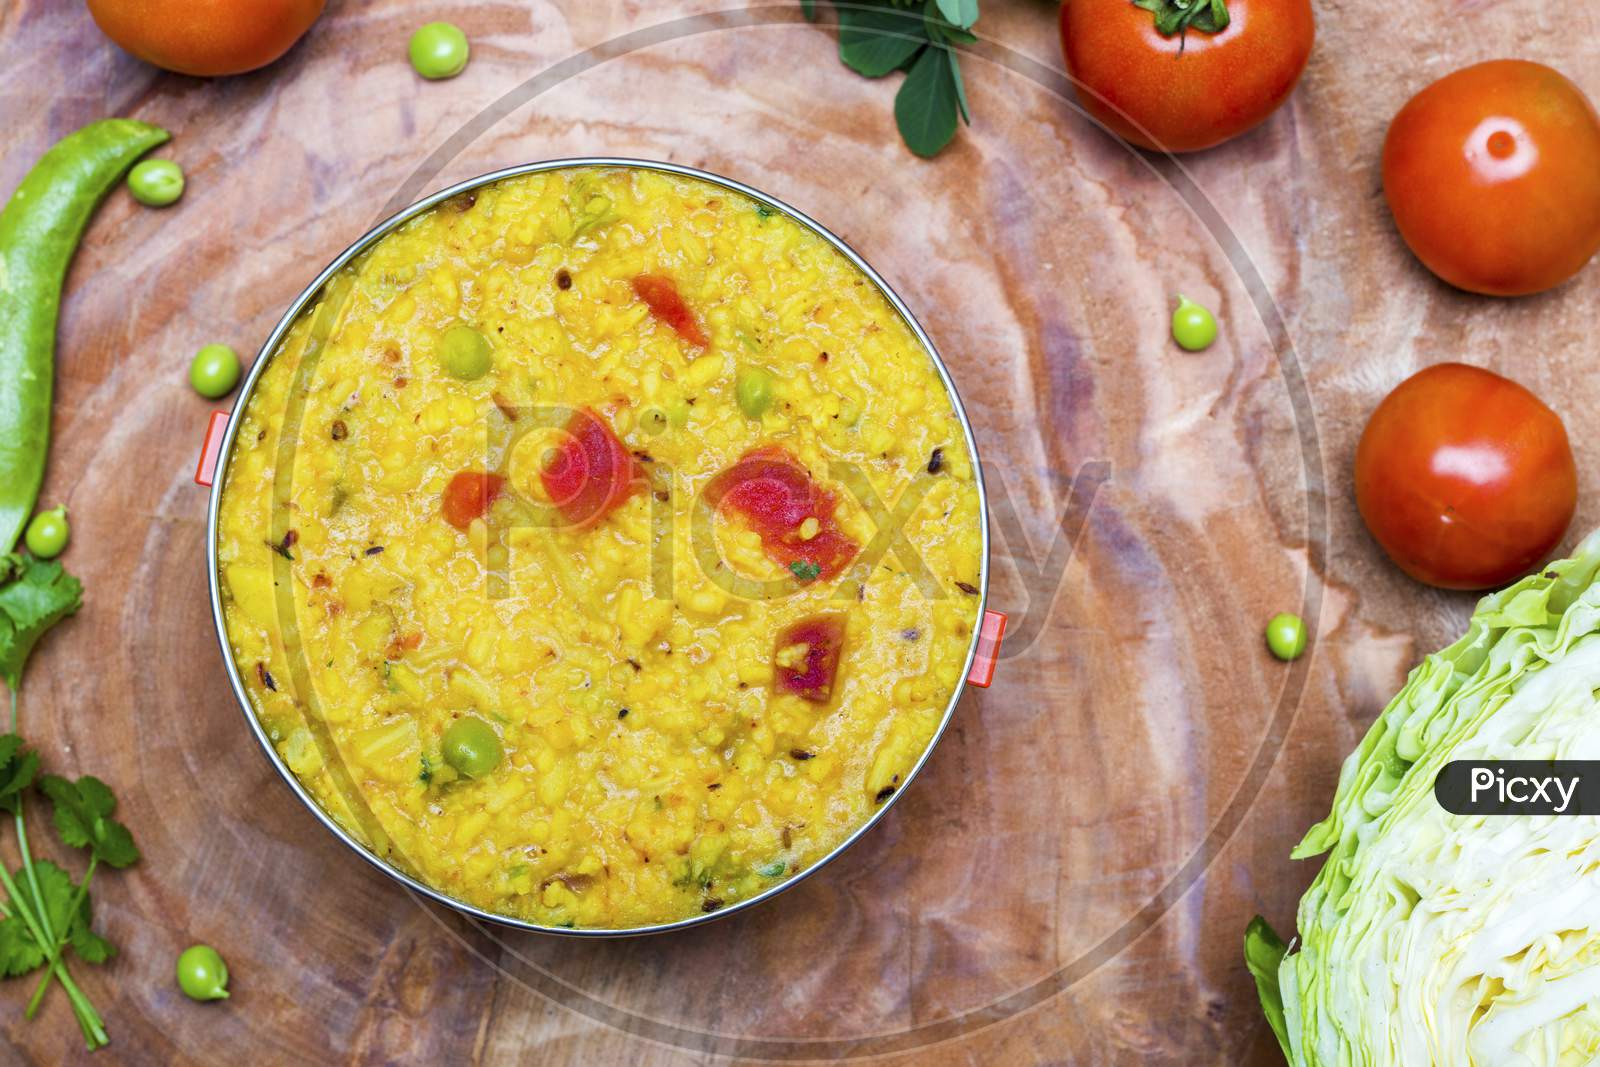 famous Indian food Khichdi is ready to serve